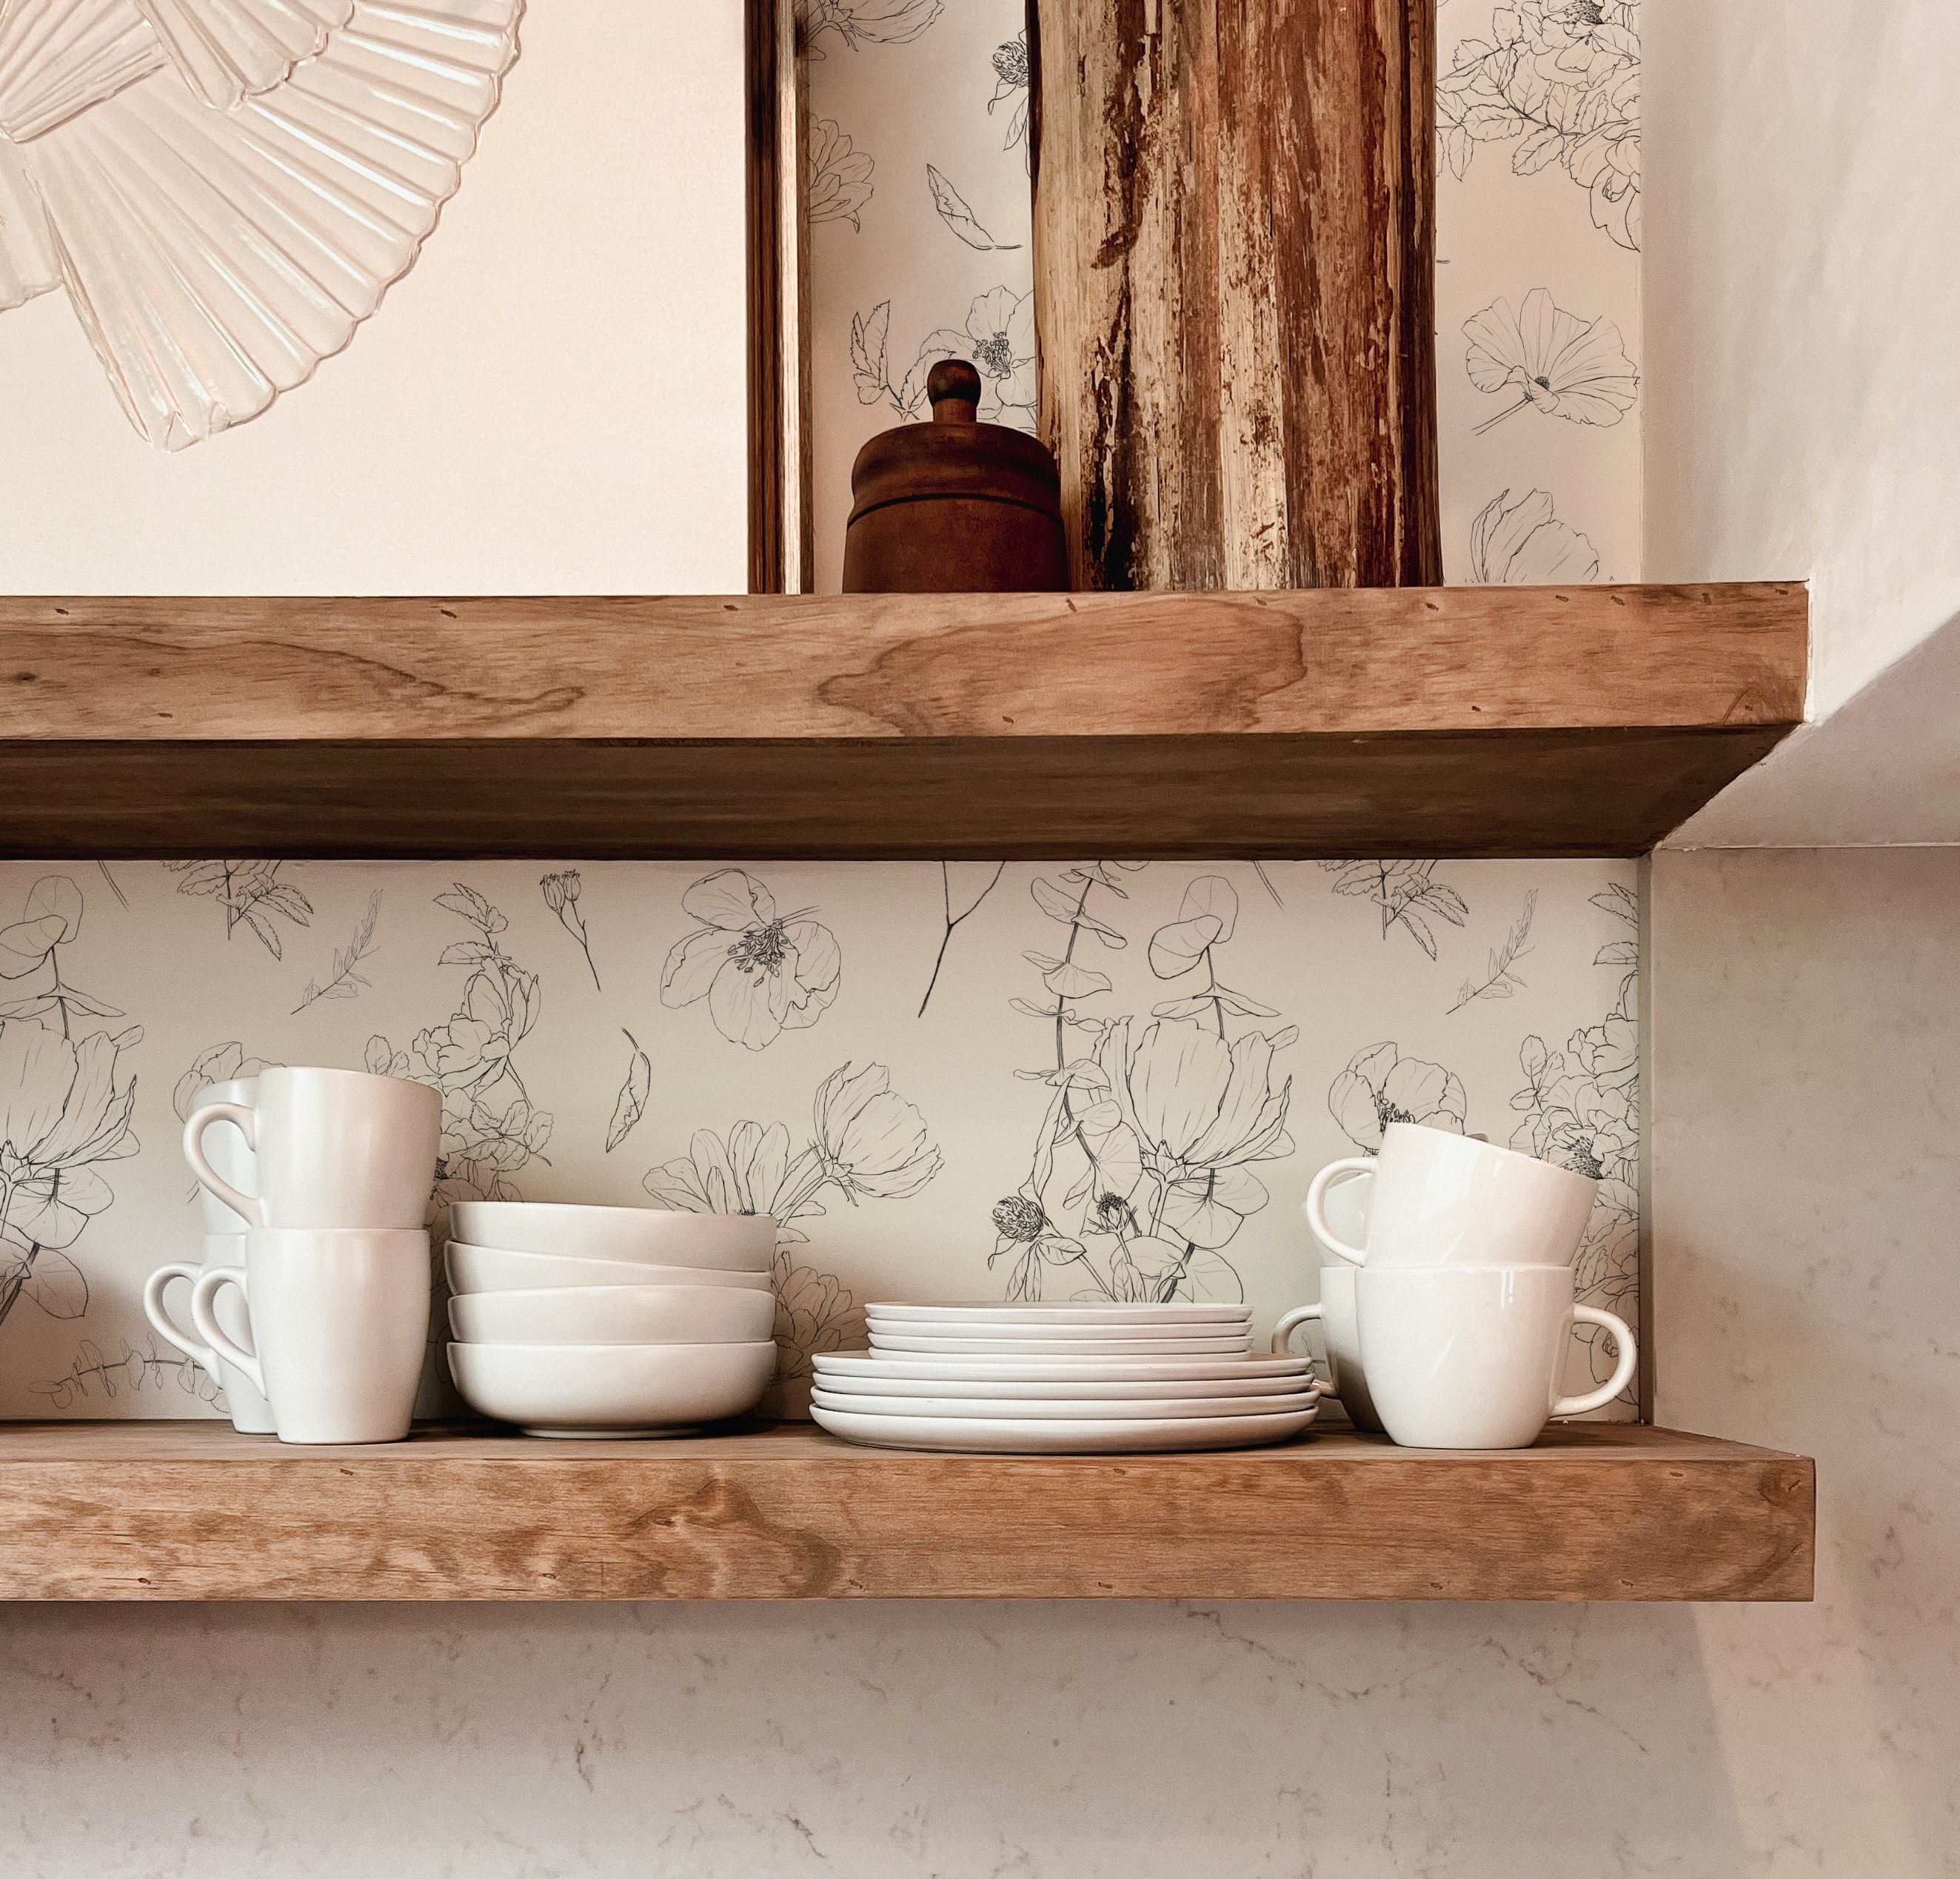 A close-up view of a kitchen shelf against a wall covered with Wildflower Sketch Wallpaper. The wallpaper displays an elegant black and white sketch of wildflowers, adding a touch of nature-inspired art to the space. On the wooden shelf, there is a neatly arranged set of white ceramic dishes including mugs, bowls, and plates. The rustic charm is complemented by the warmth of the wood and the clean lines of the tableware.